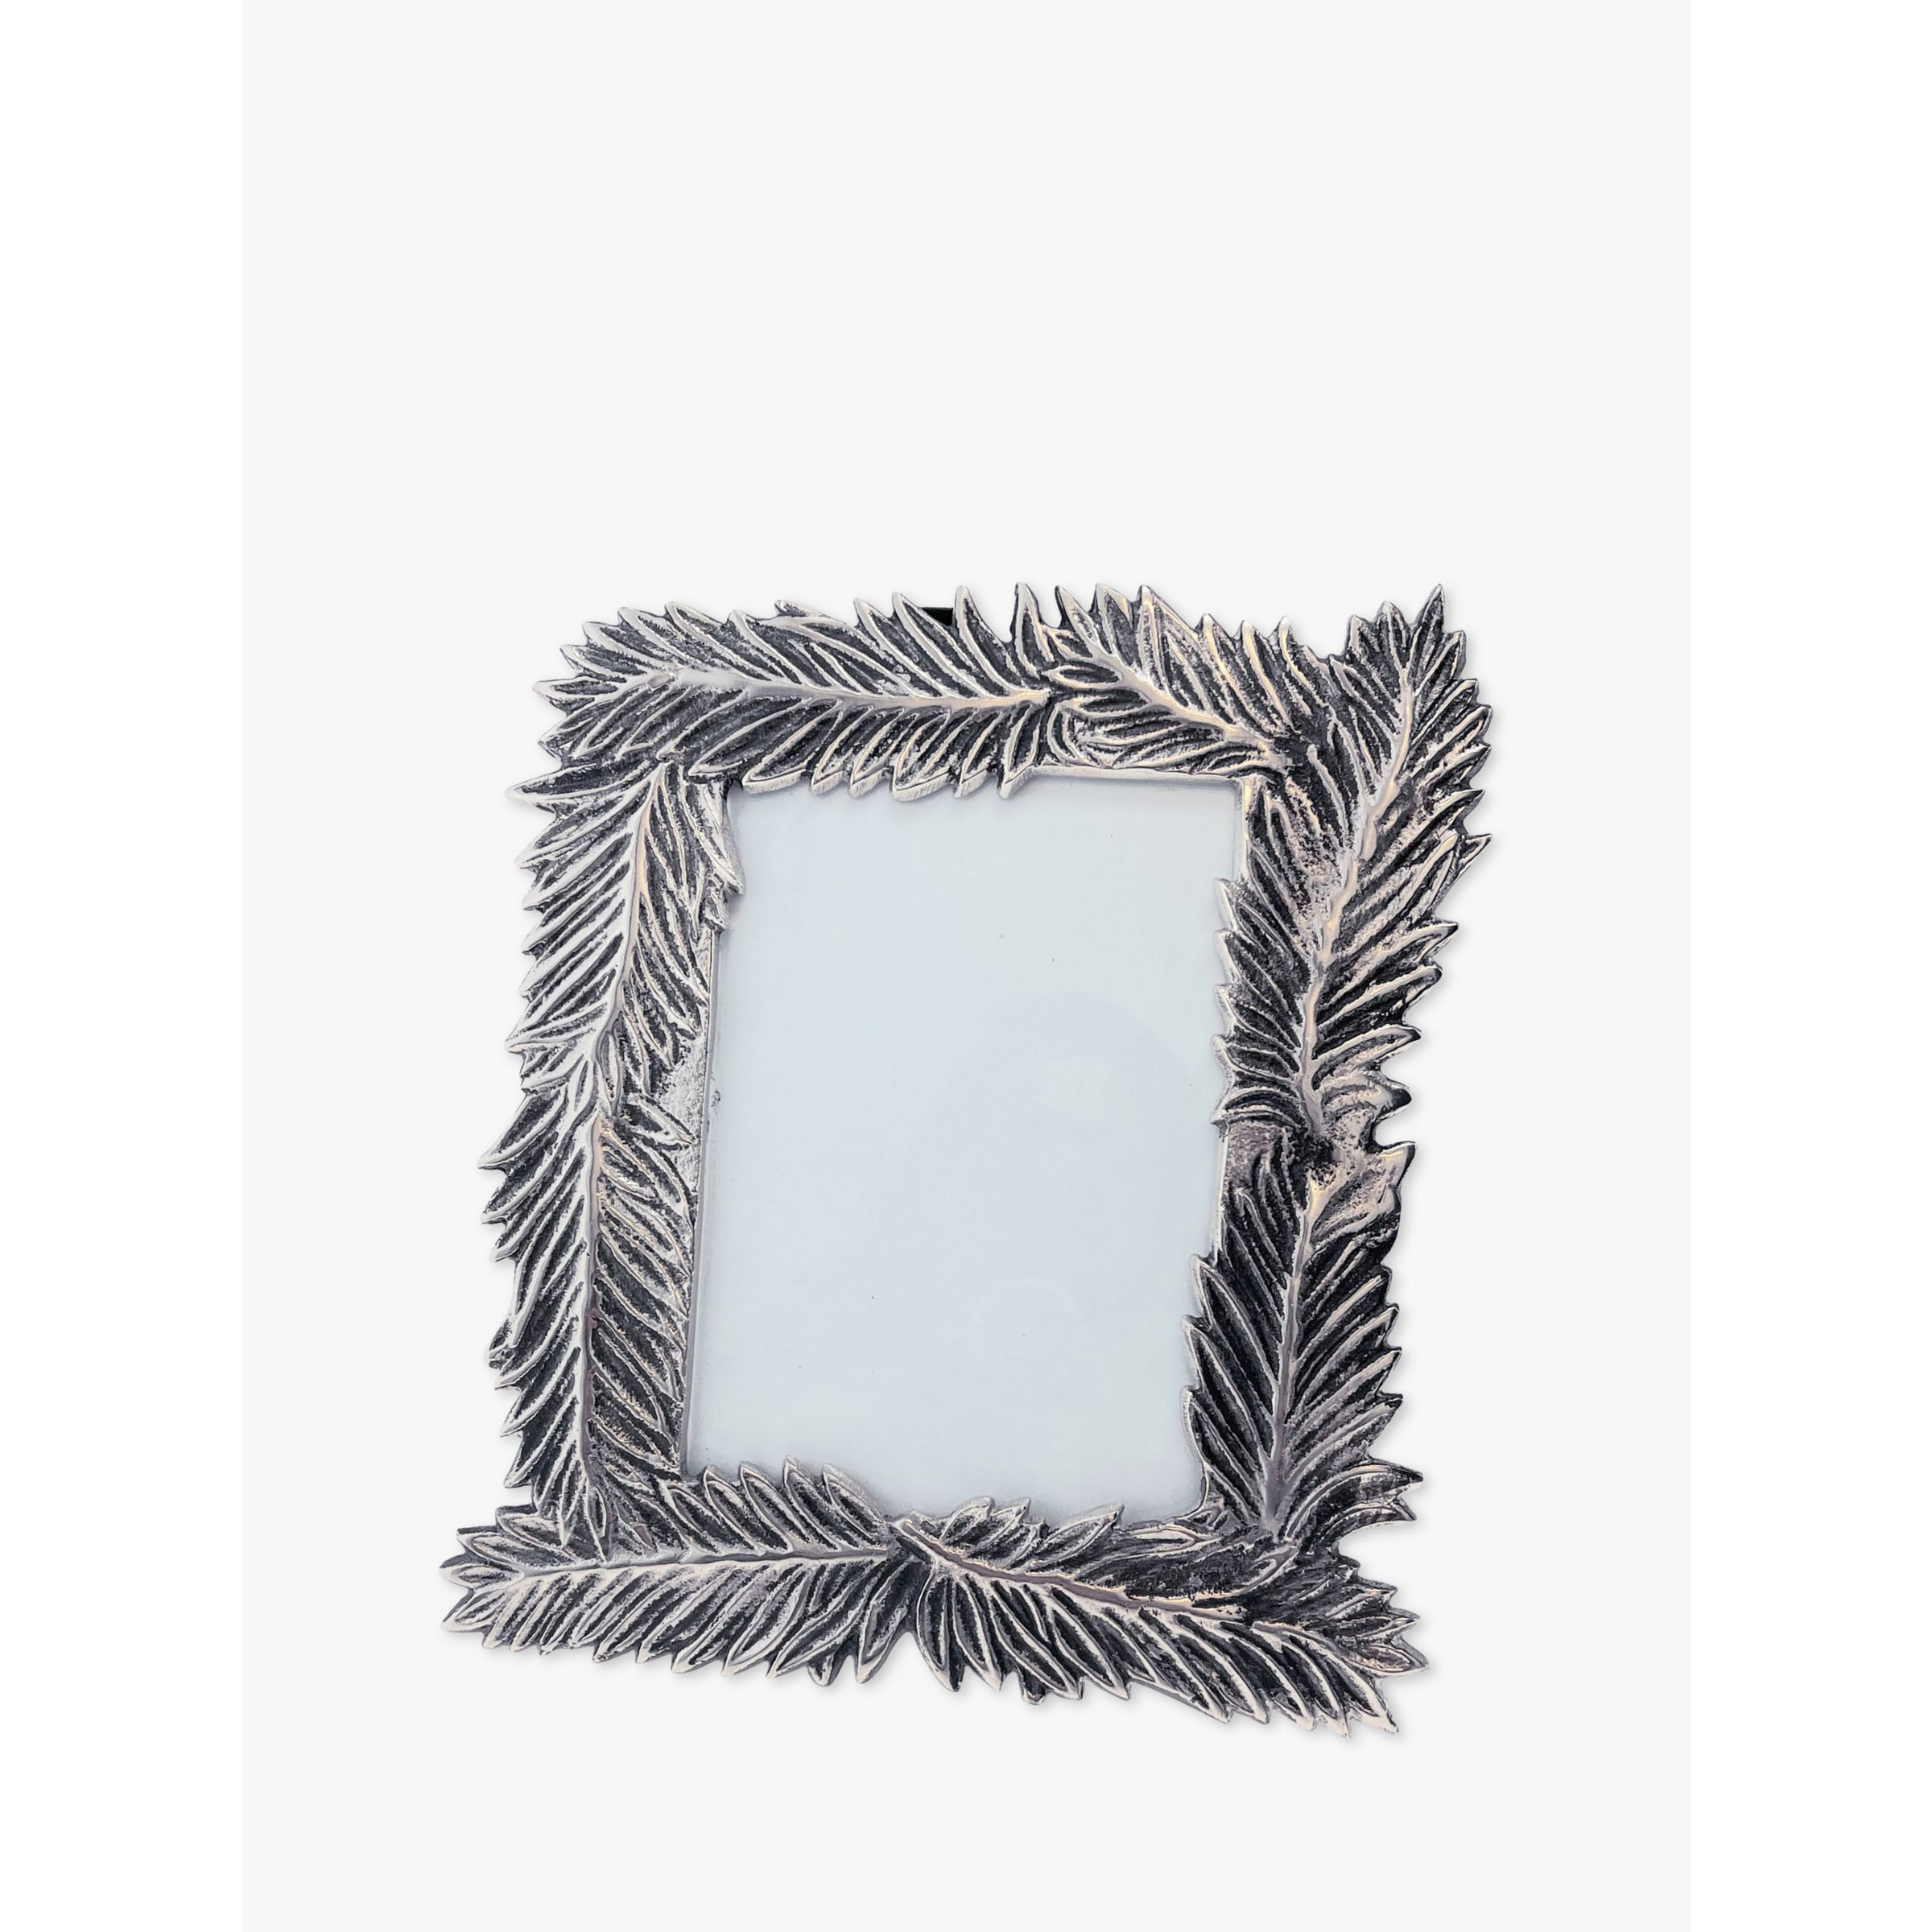 "Culinary Concepts Feather Metal Photo Frame, 5 x 7"" (13 x 18cm), Silver" - image 1